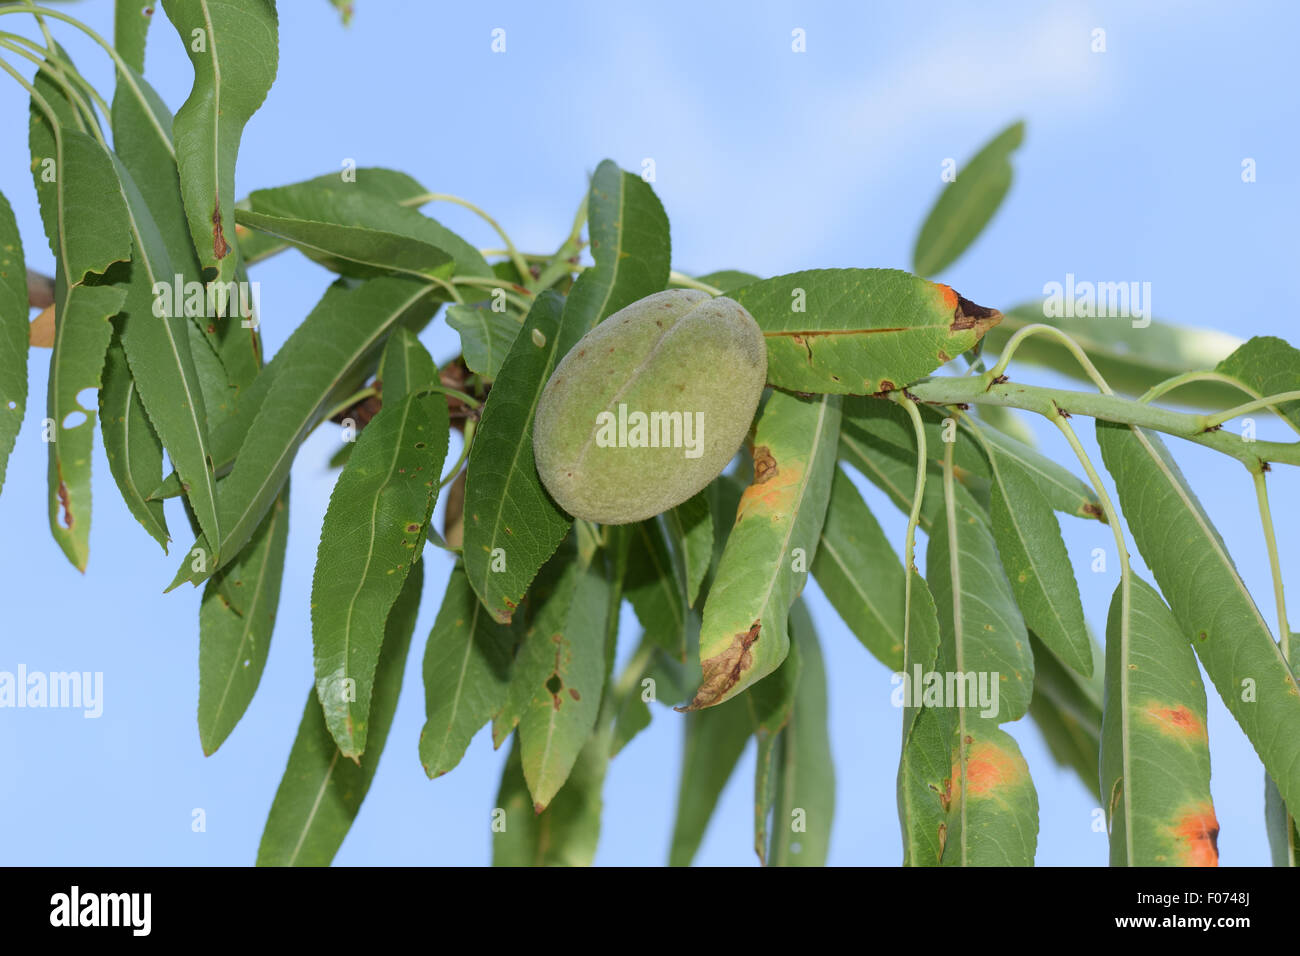 a not fully ripened almond hanging on a branch. Stock Photo